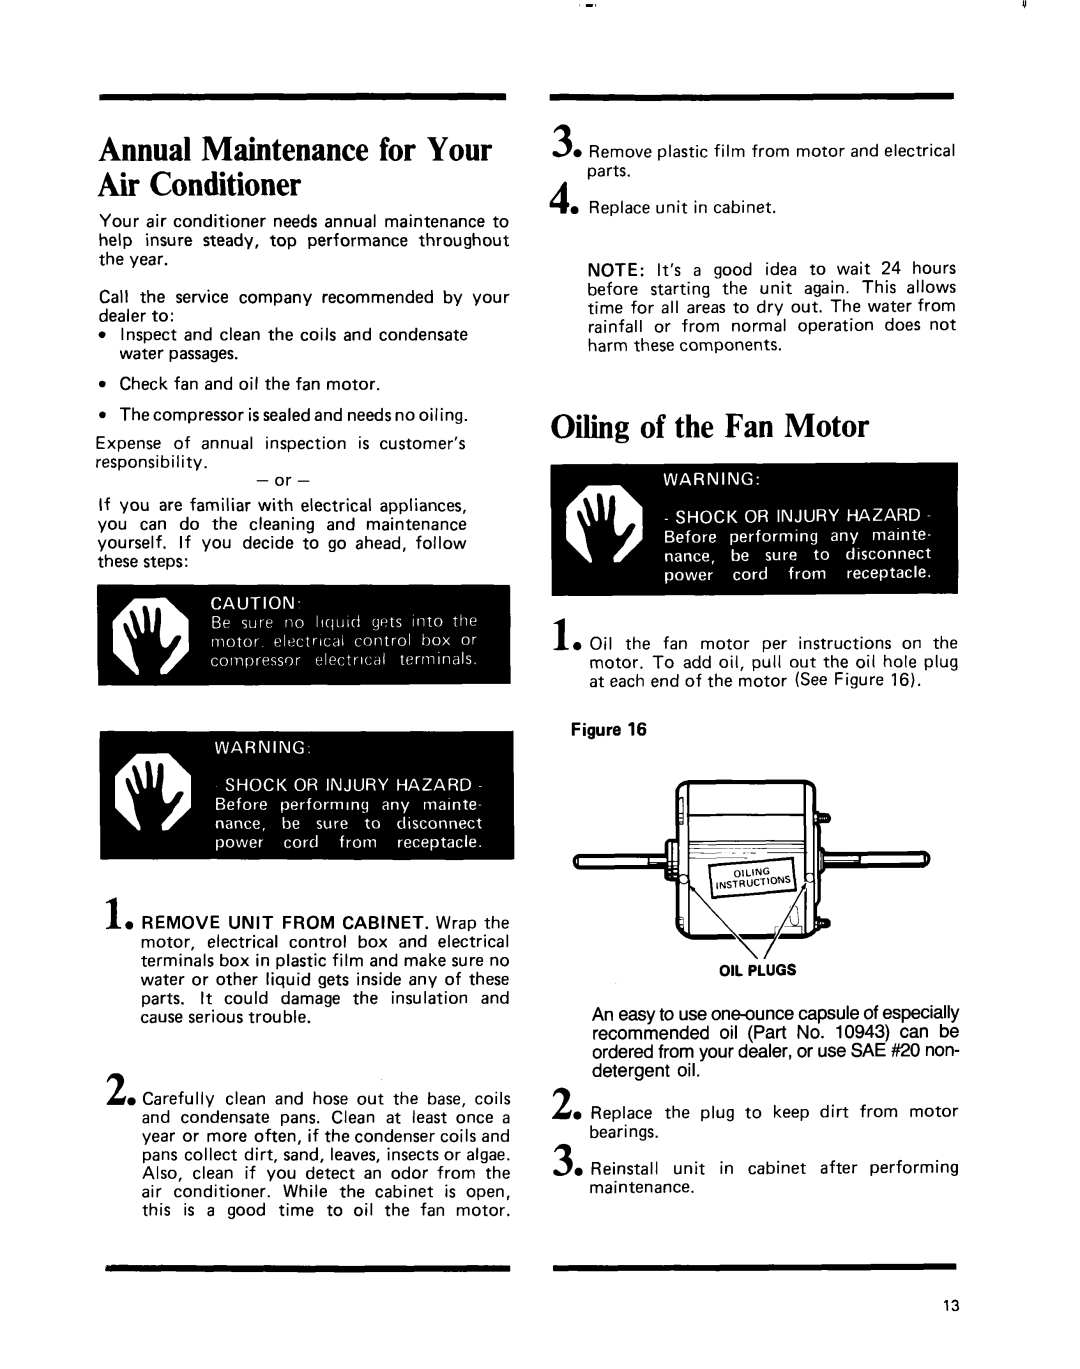 Whirlpool ACE184XM0 manual Annual Maintenance for Your Air Conditioner, Oiling of the Fan Motor 